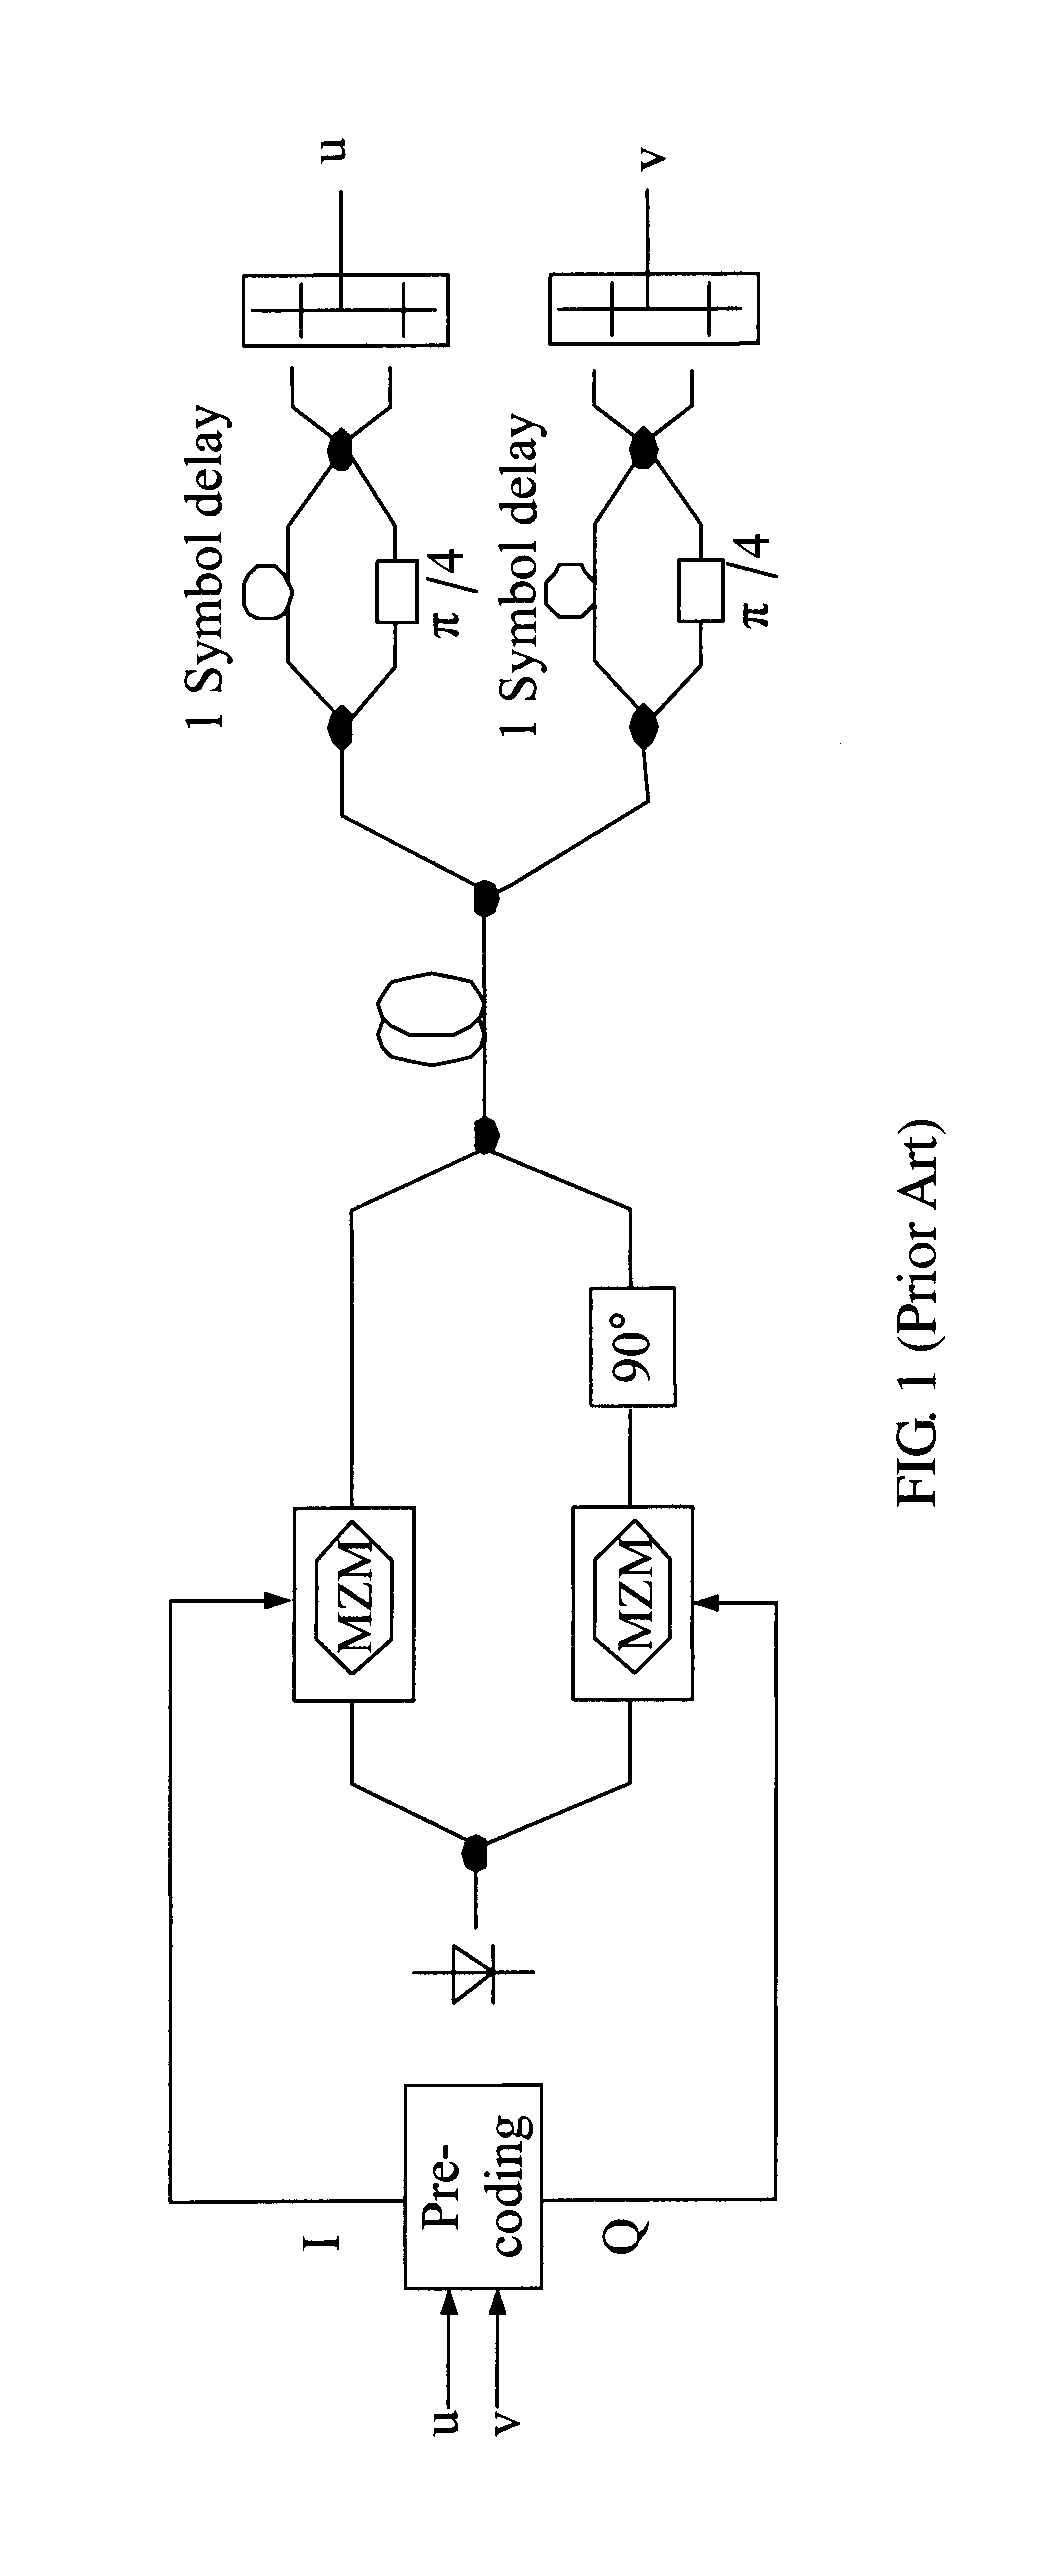 Differential quadrature phase shift keying system, method, and device